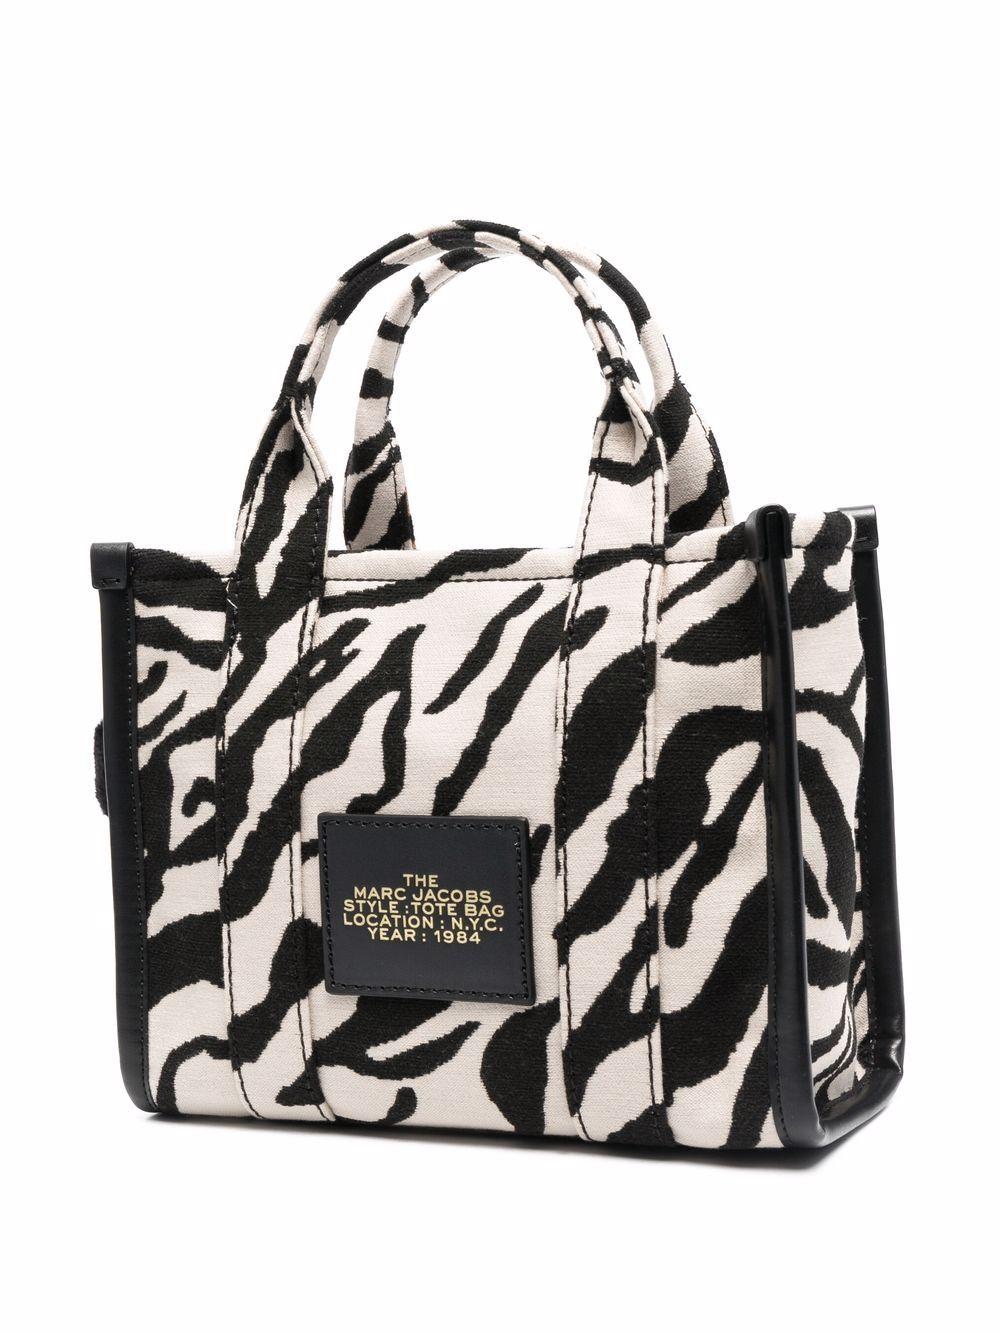 The Tiger Stripe Tote Bag, Marc Jacobs